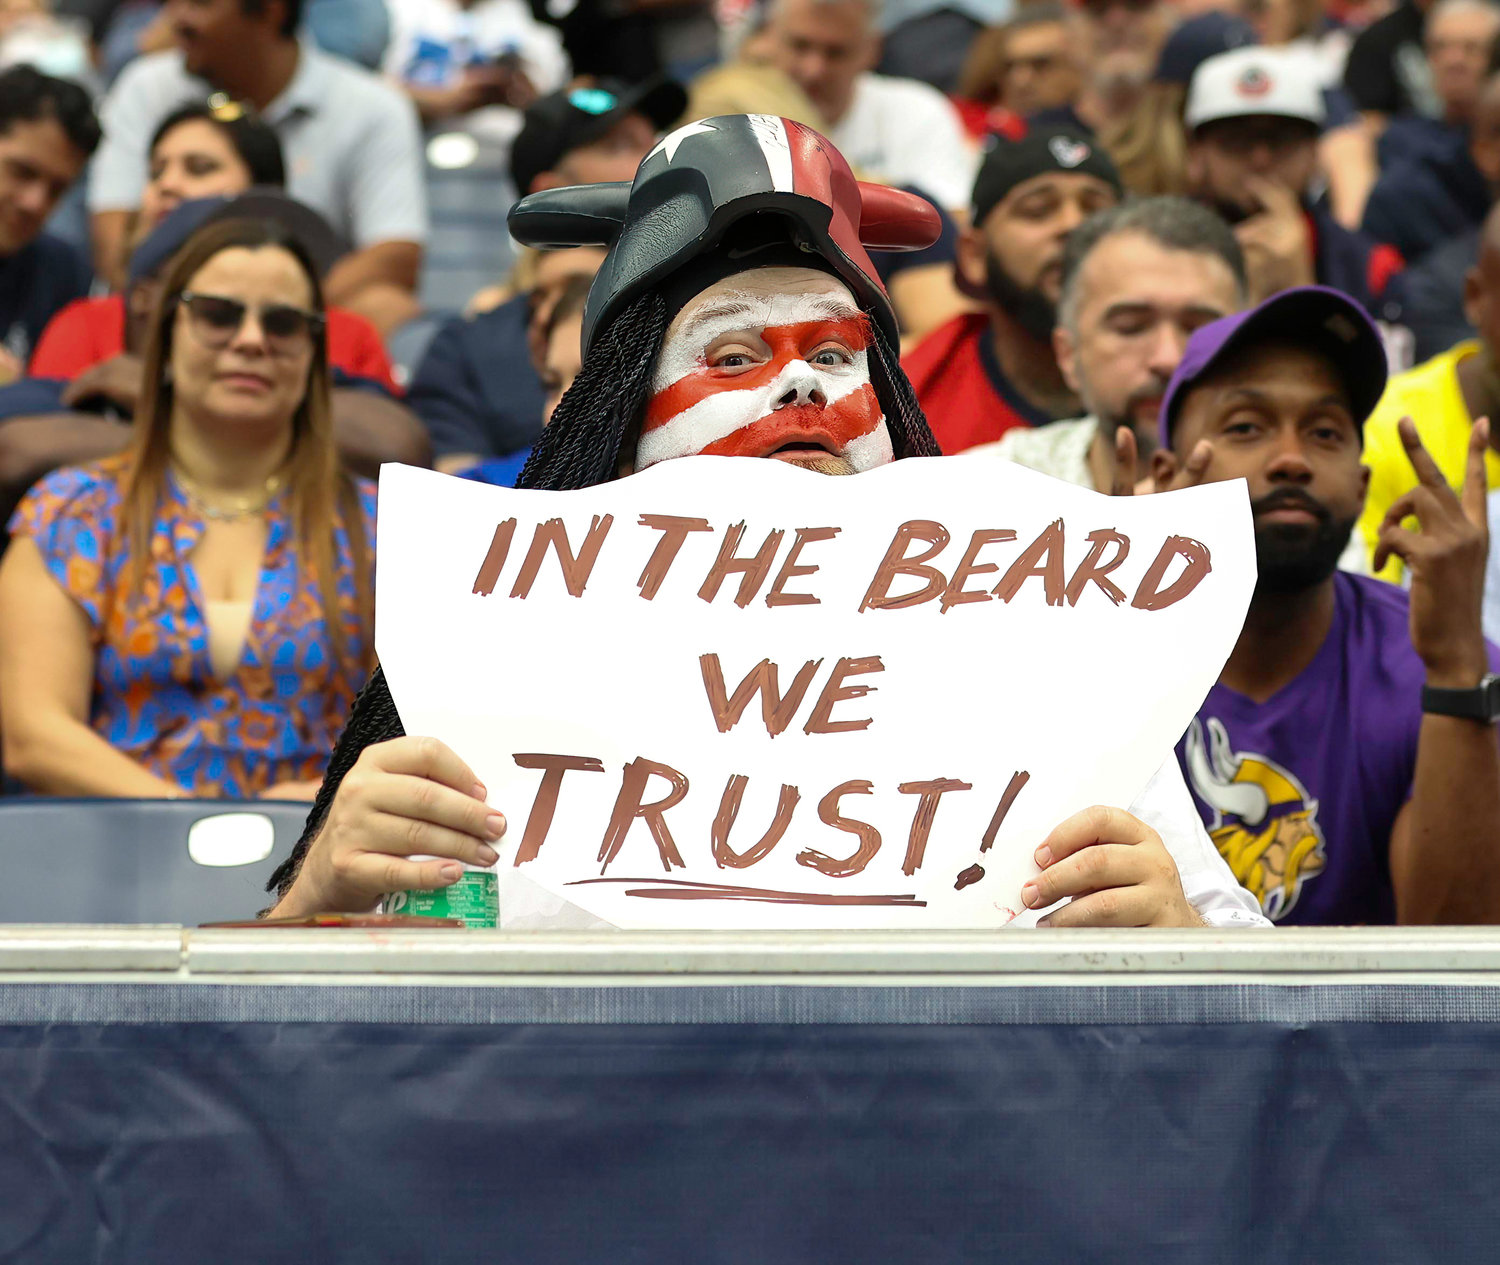 A Houston Texans fan holds a sign referencing head coach Lovie Smith, who is known for his beard, during an NFL game between the Texans and the Colts on September 11, 2022 in Houston. The game ended in a 20-20 tie after a scoreless overtime period.